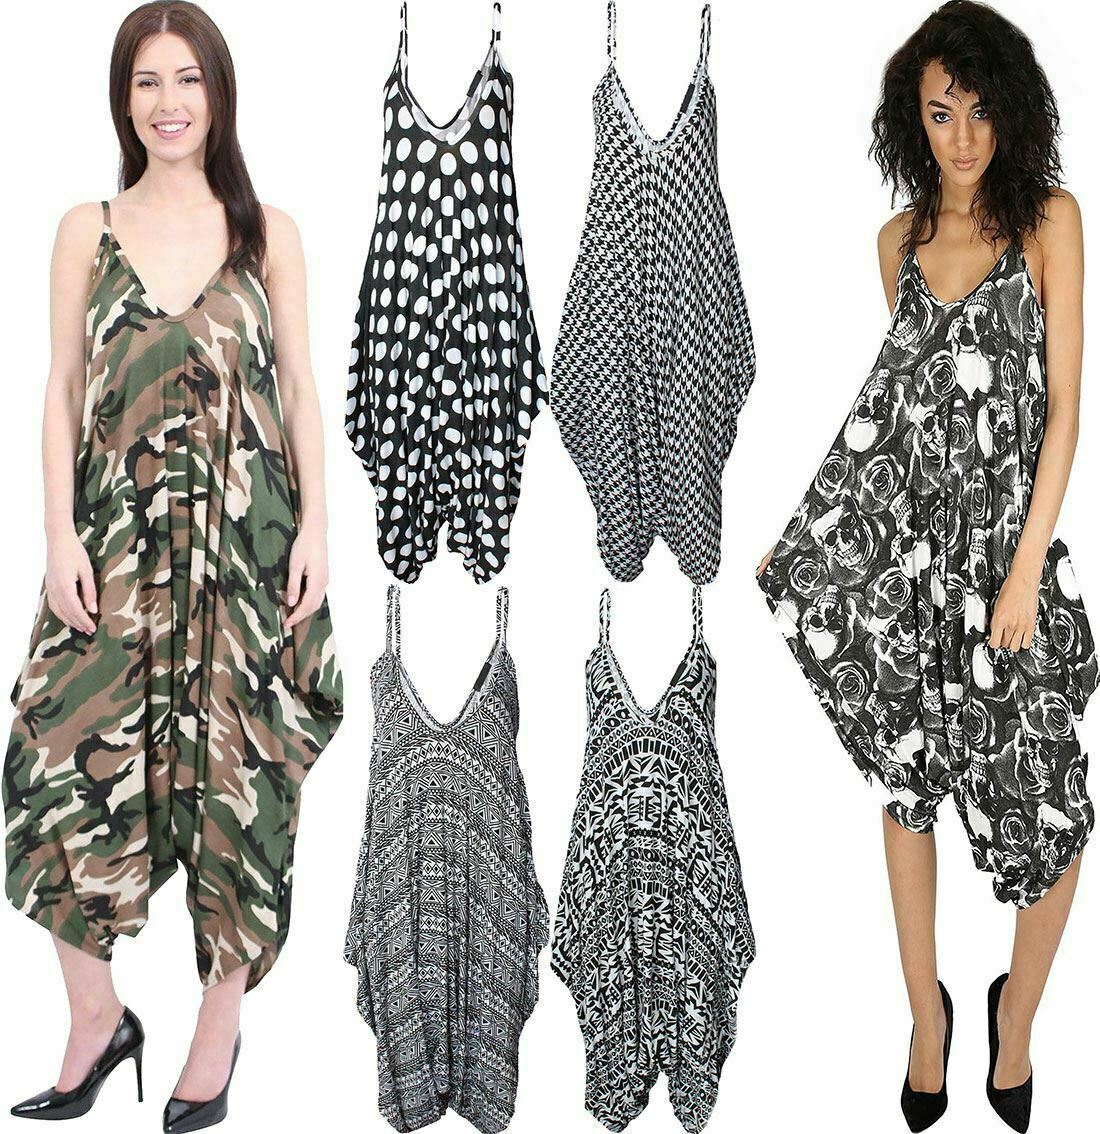 WearAll Womens Lagenlook Strappy Baggy Harem Jumpsuit Dress Top Playsuit  Cami  Army  One Size  Amazoncouk Fashion